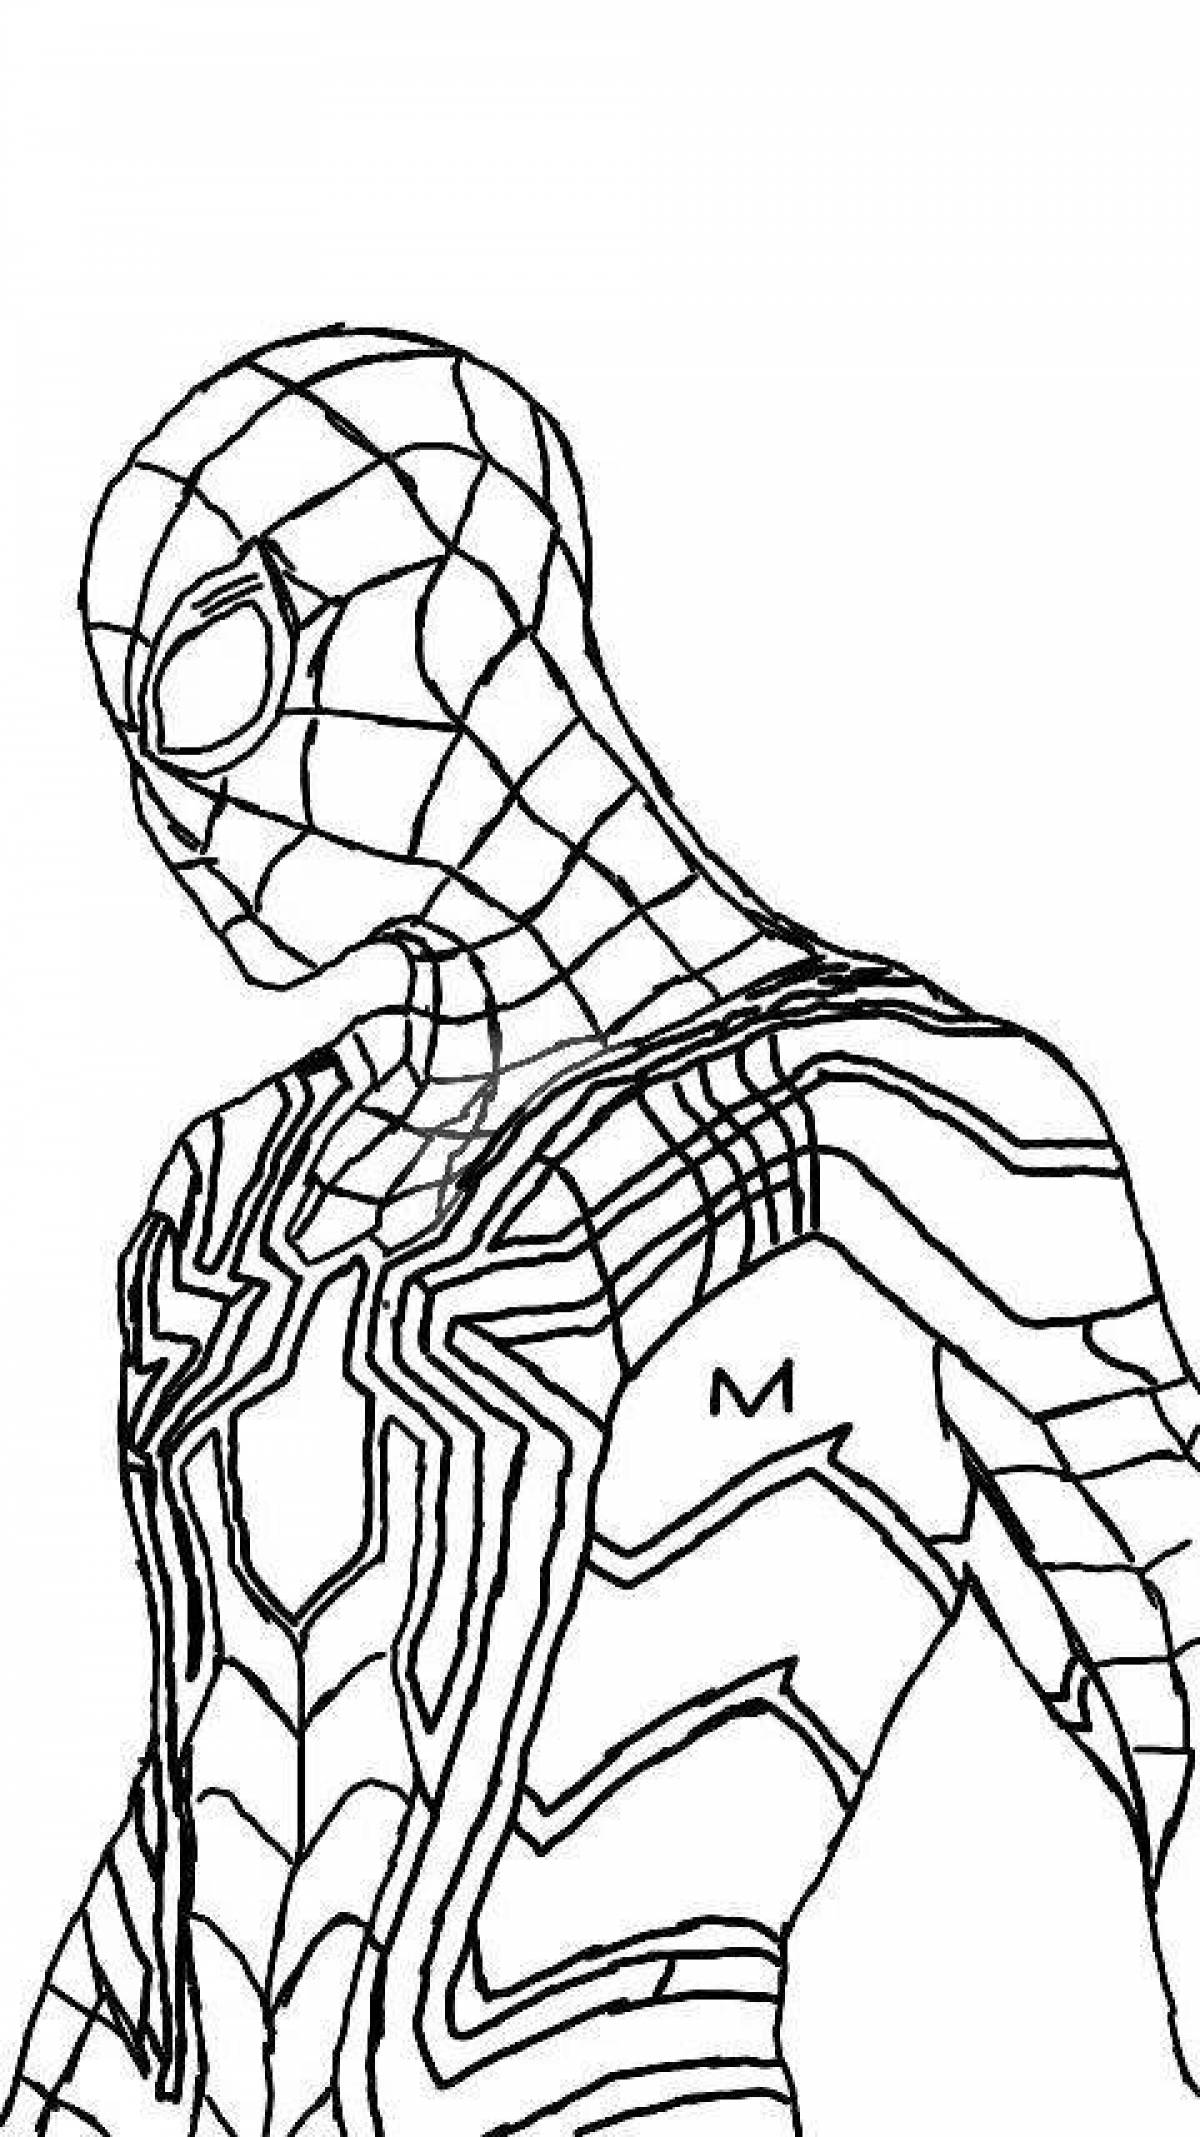 Color-explosion tom holland coloring page